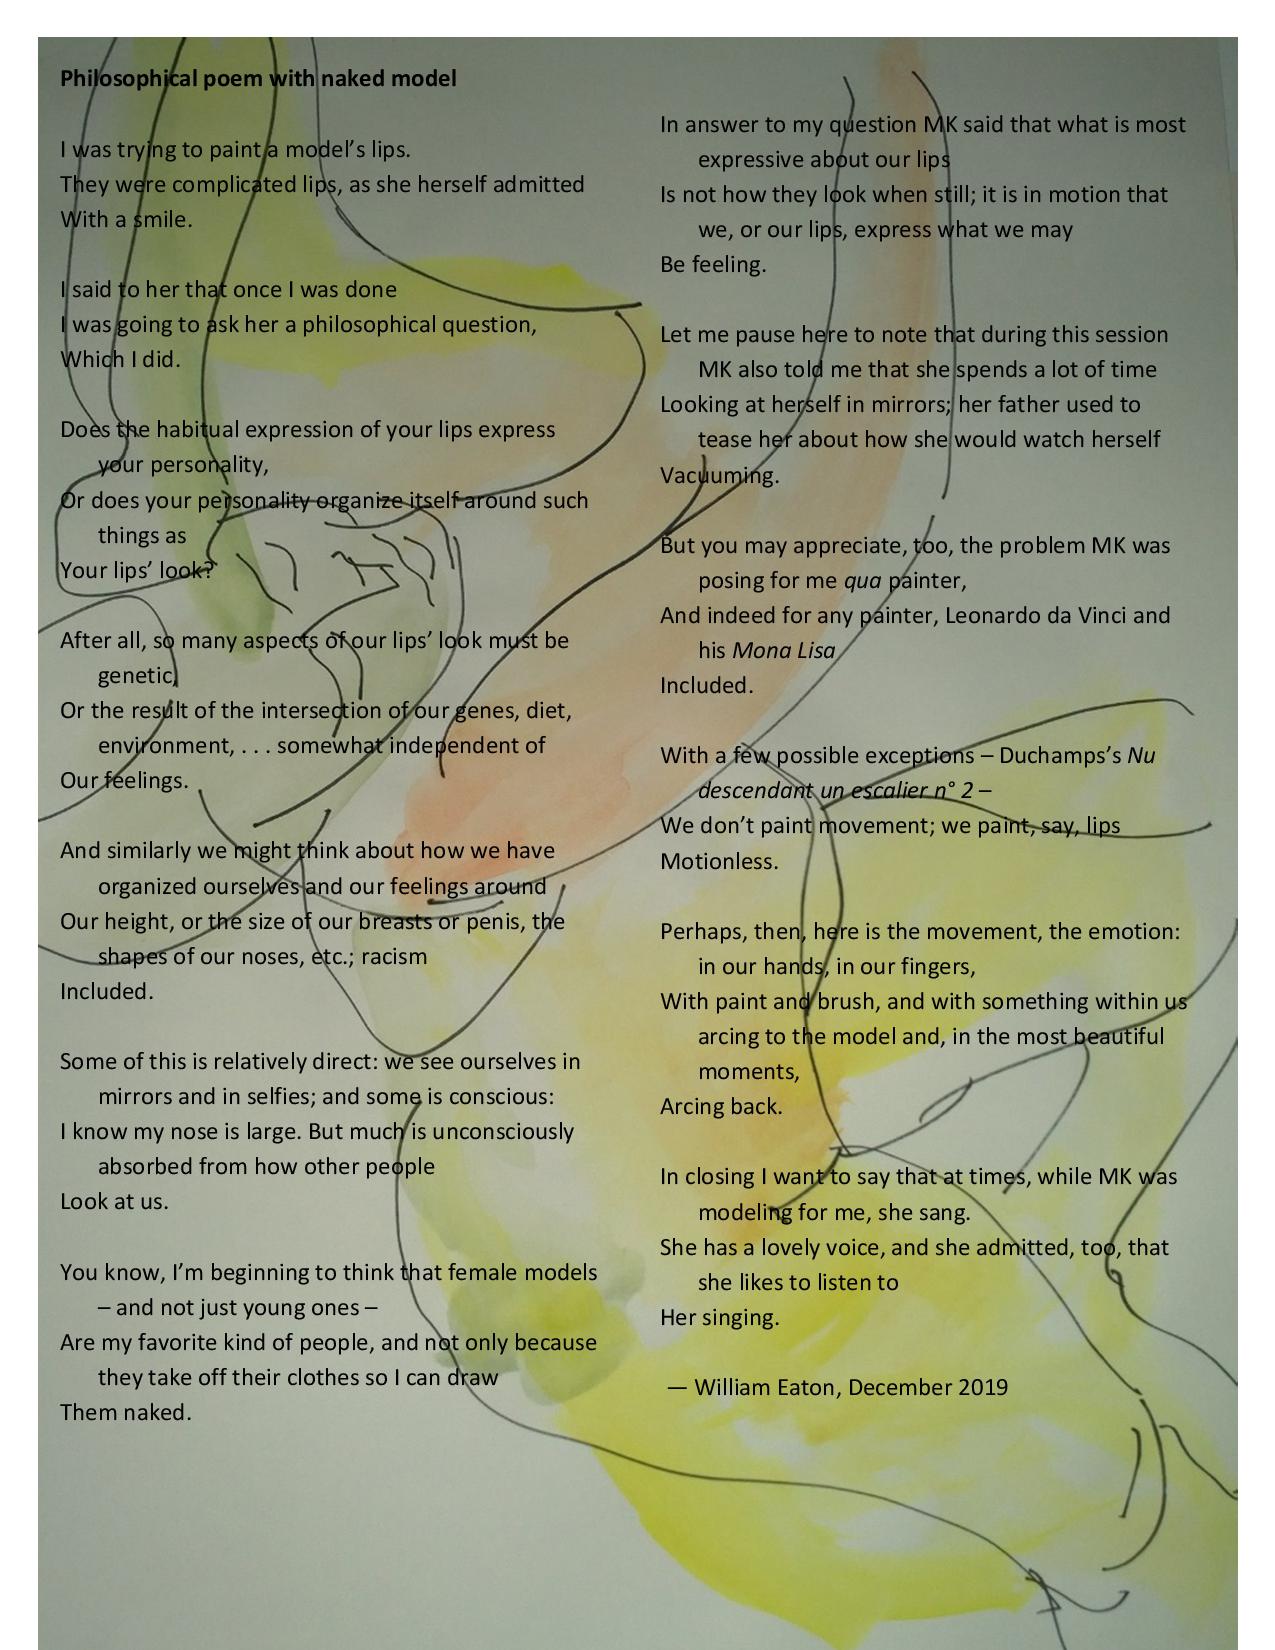 Philosophical poem with naked model, text and drawing by William Eaton, 2019